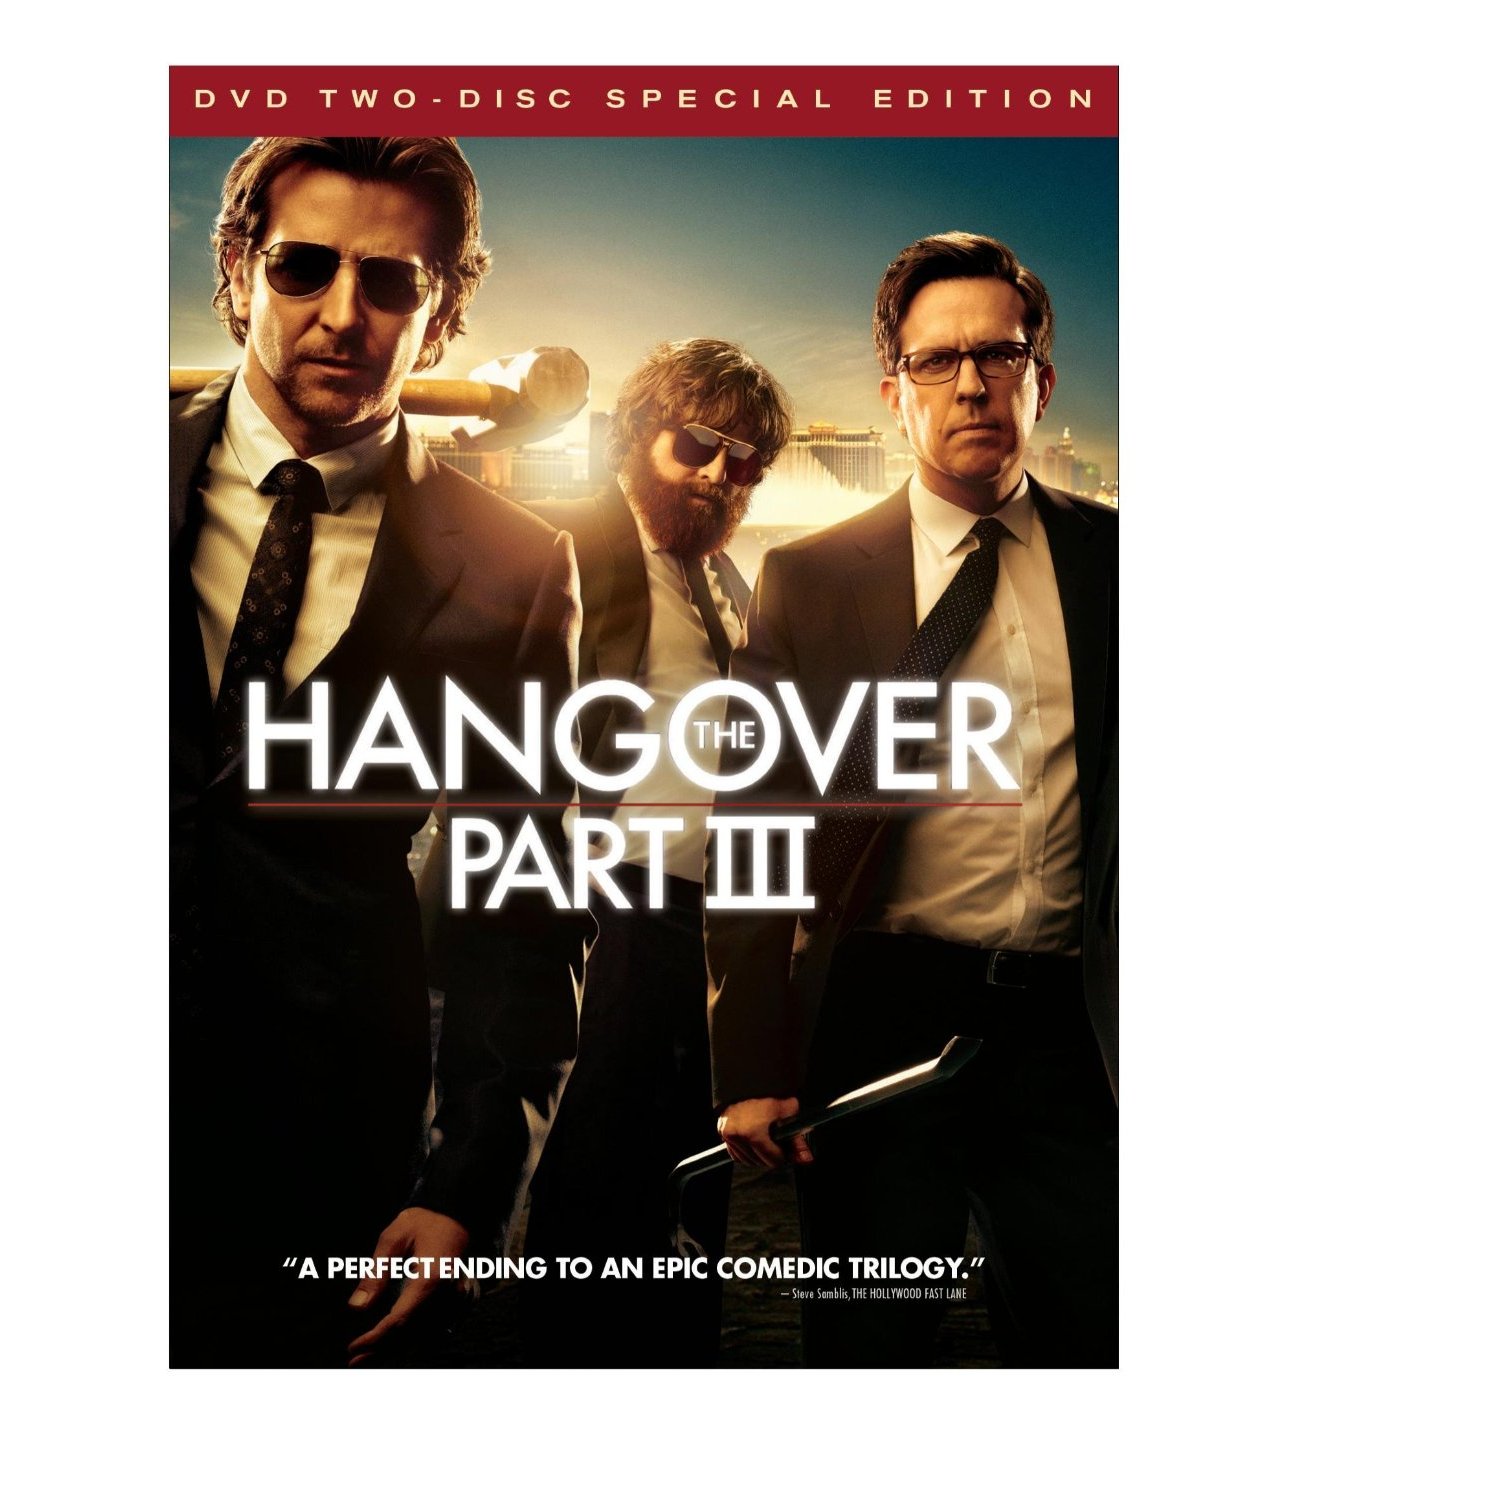 The Hangover Part 3